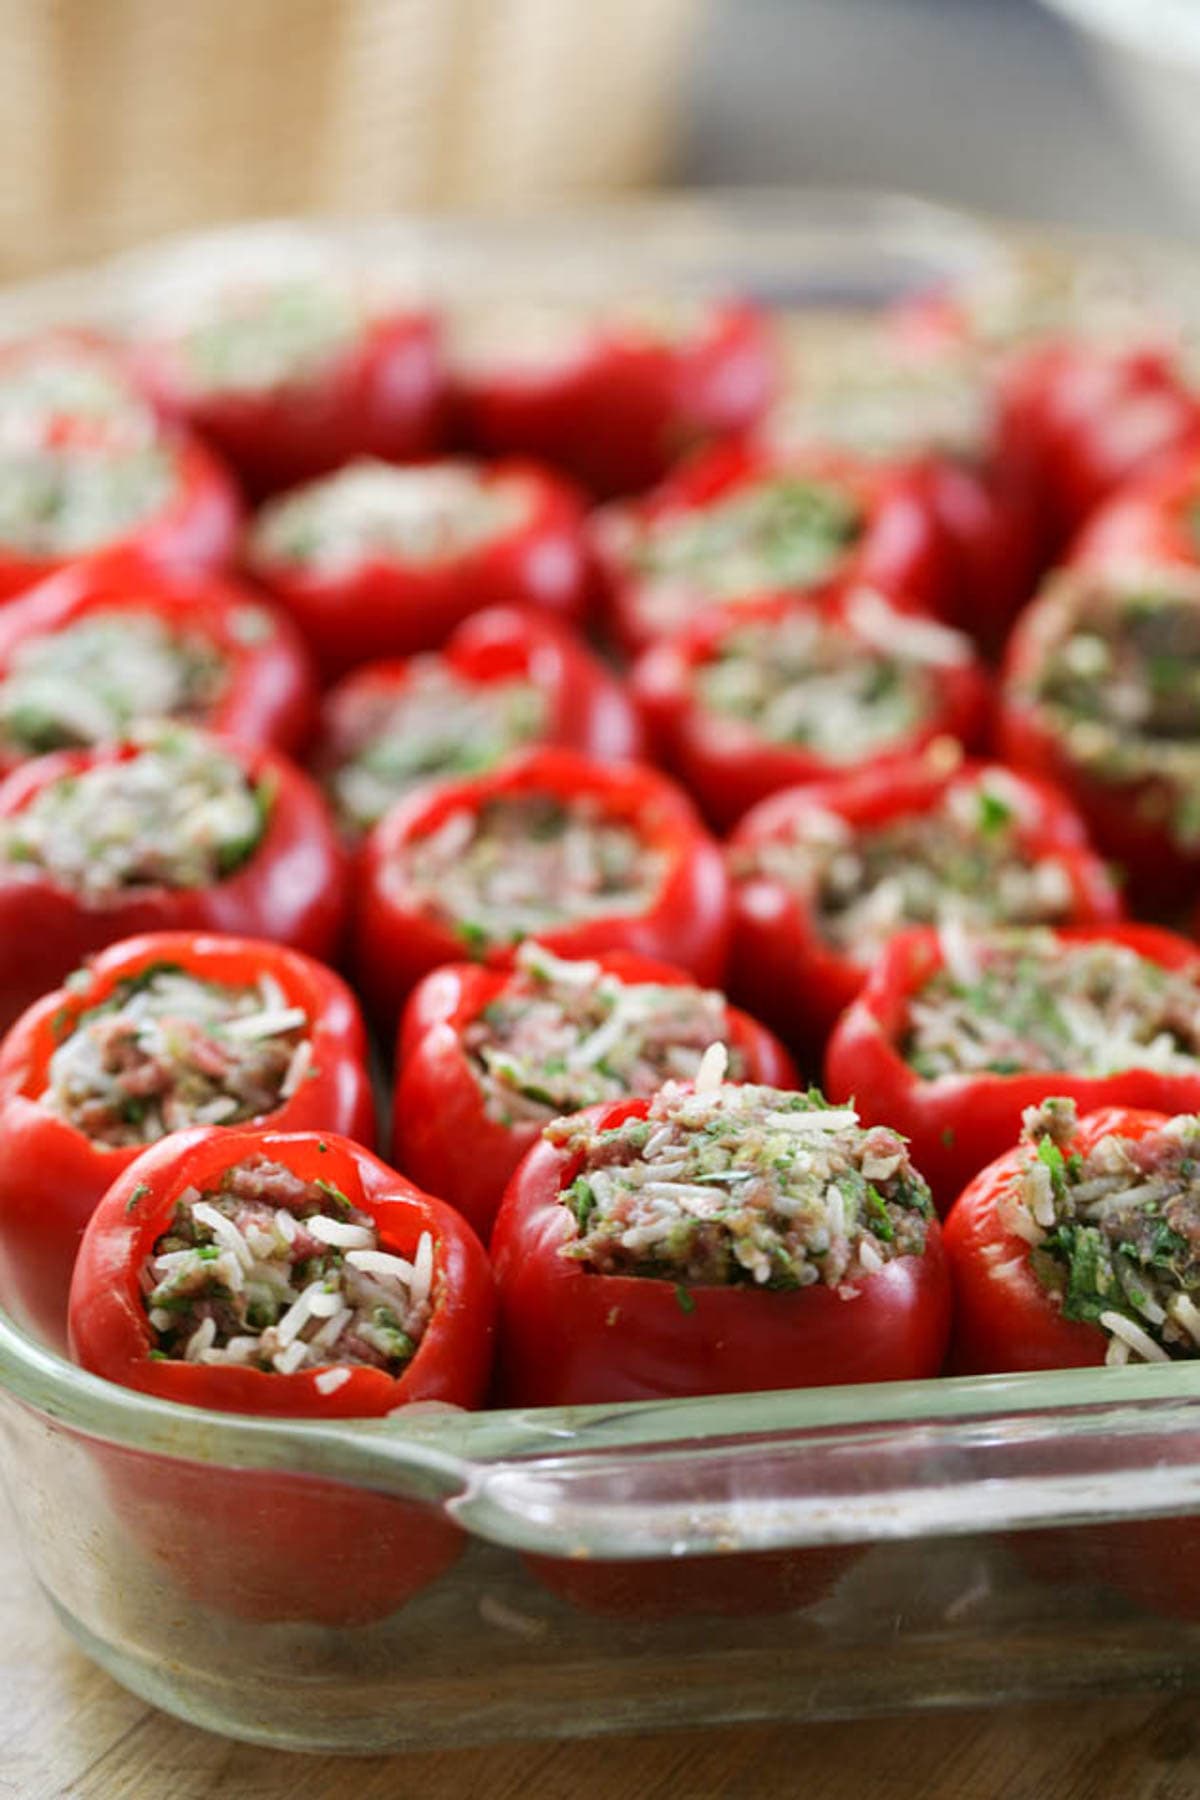 stuffed peppers ready for cooking